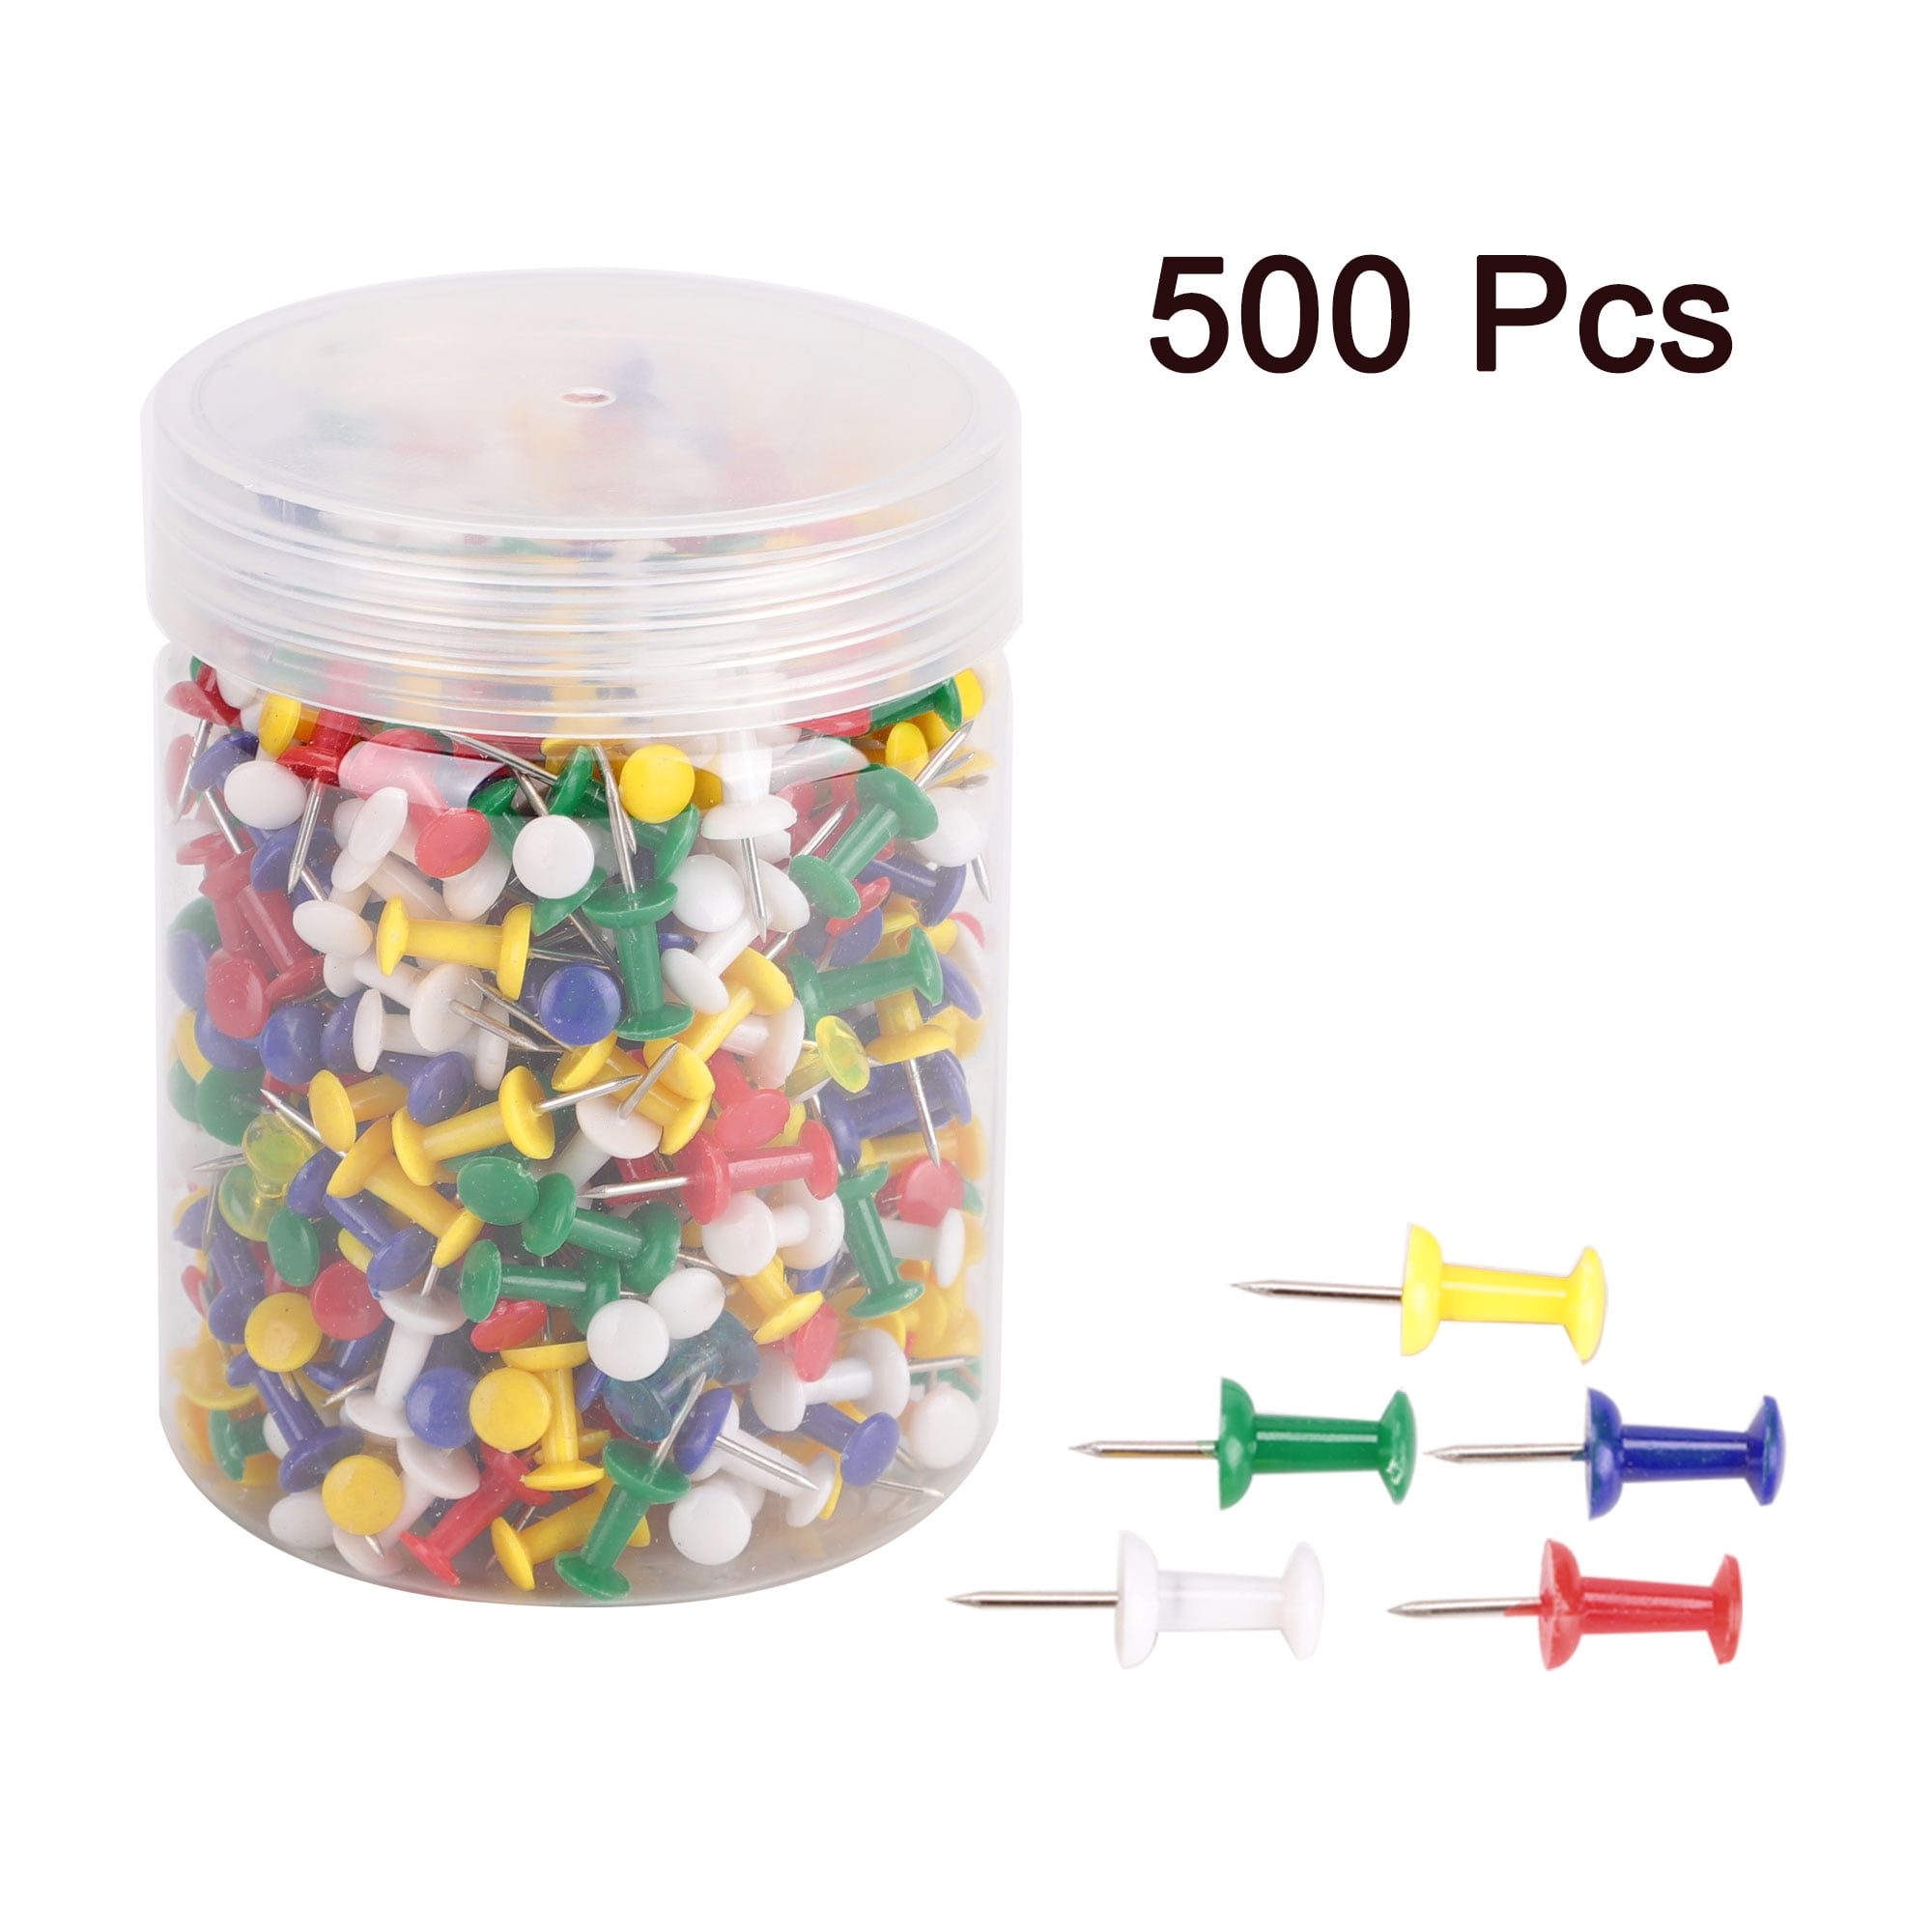 500 Pcs 3/8 Inch Push Pins  Thumb Tacks Office Cork Boards Map Note Picture Hanging Assorted Color